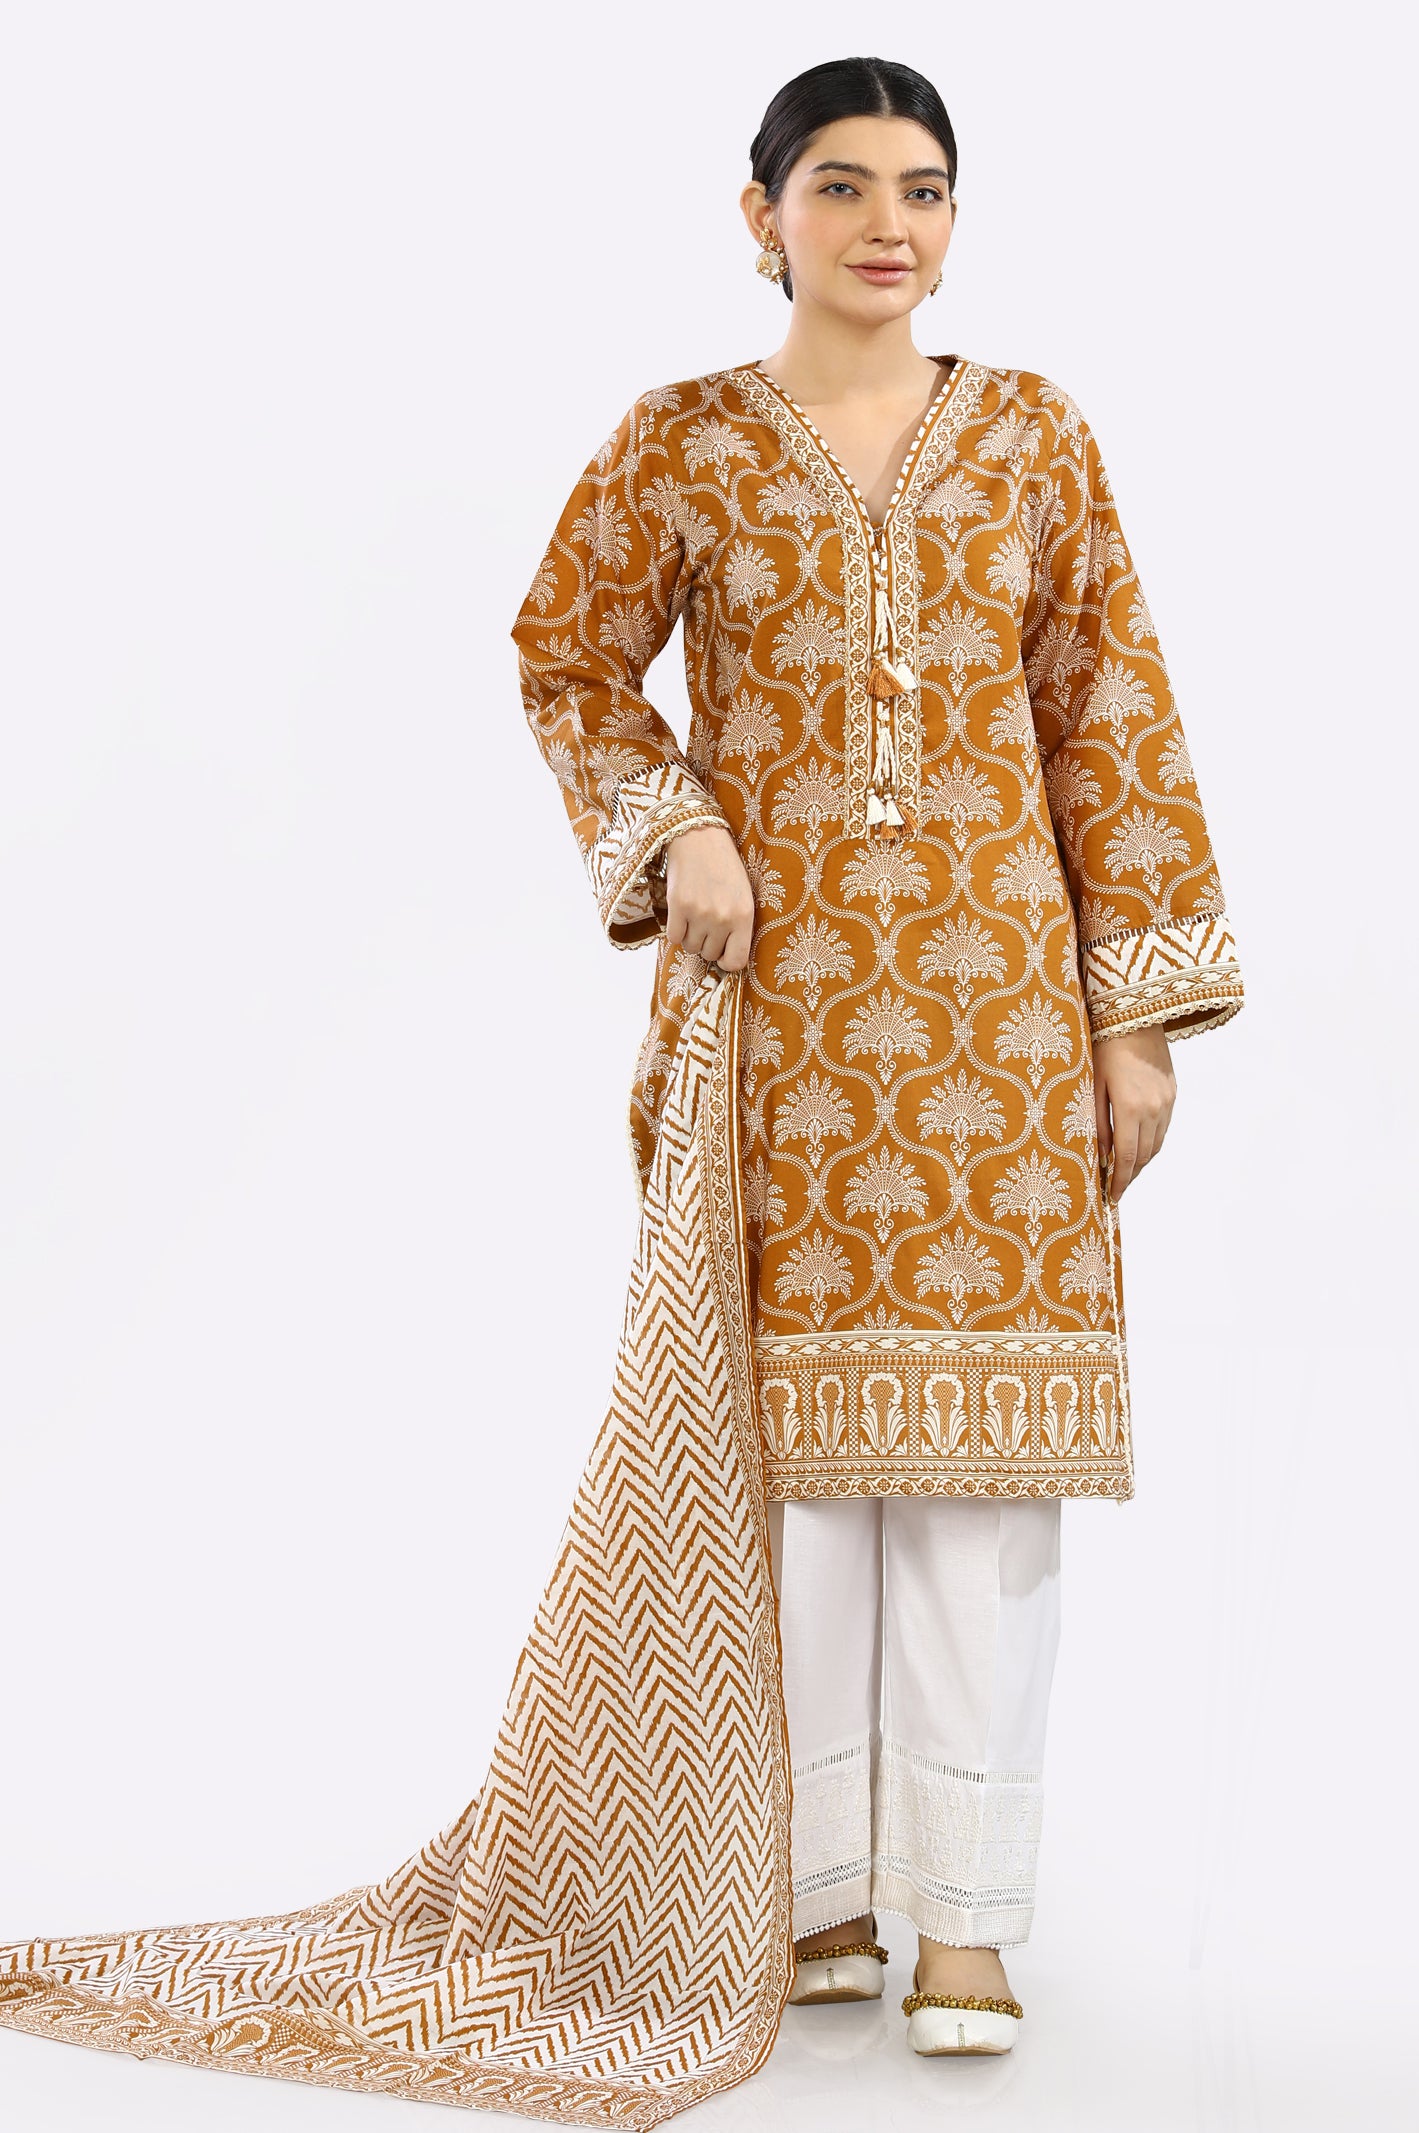 2PC Printed Mustard Suit From Diners